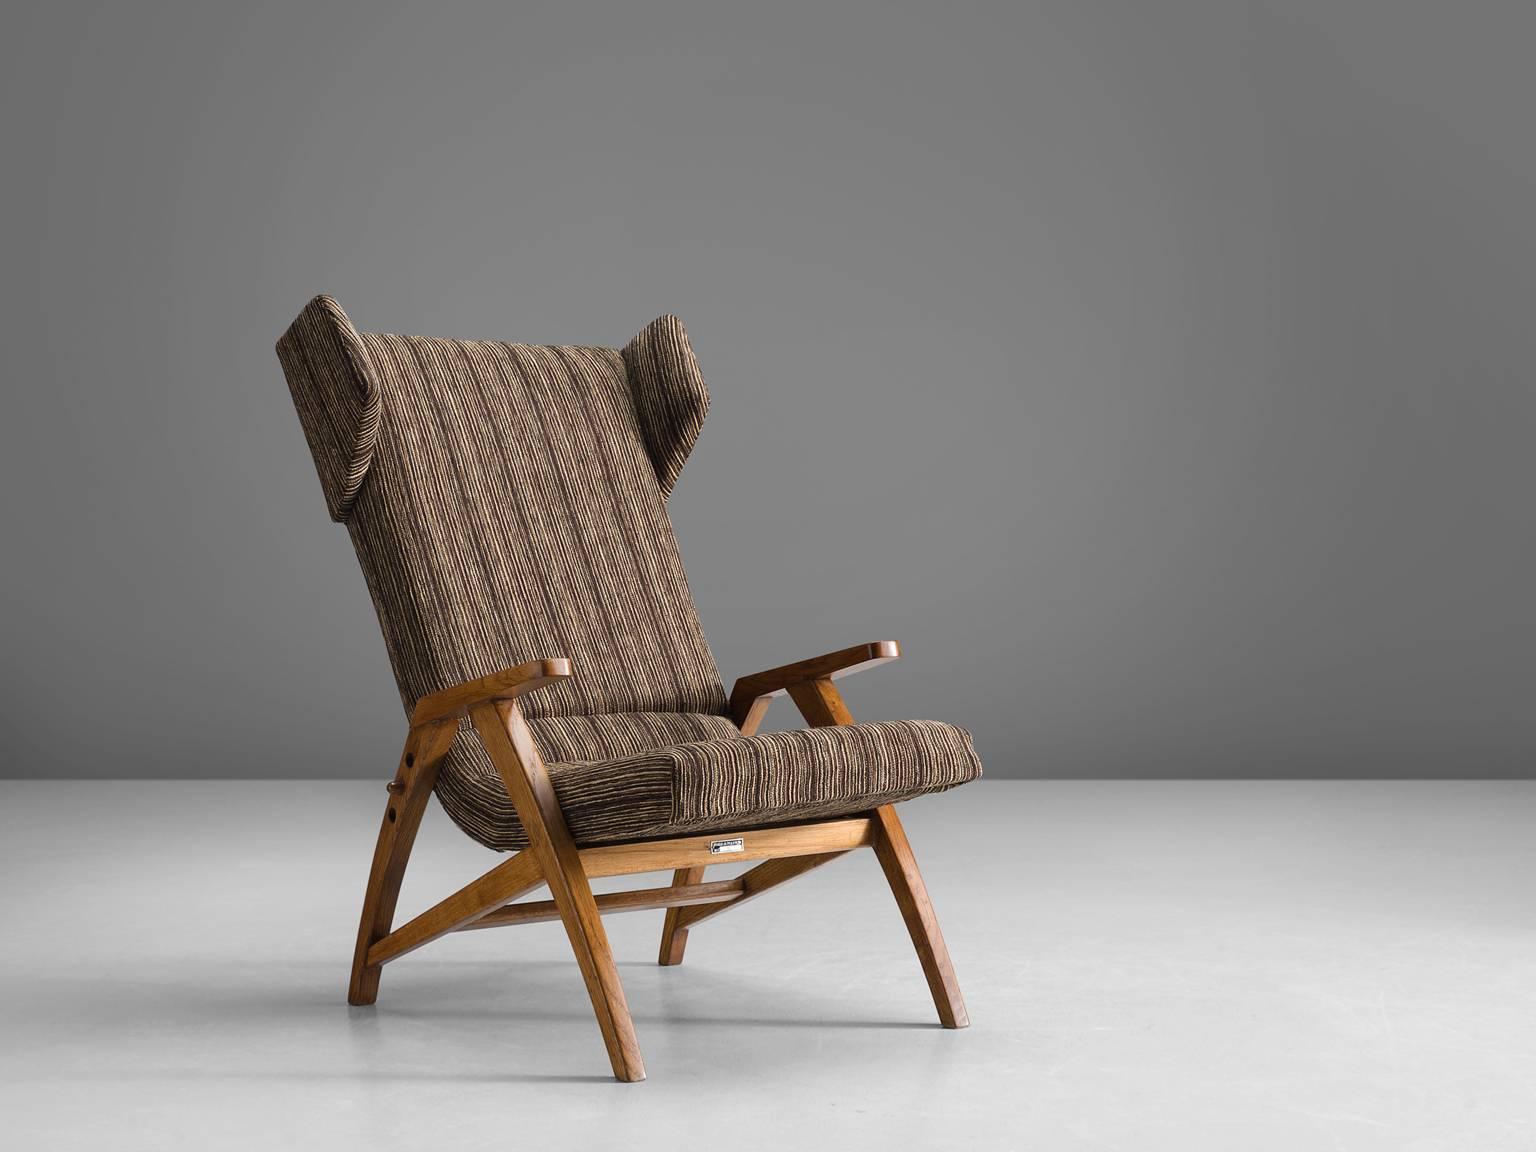 Easy chair, wood, beige brown fabric, oak, Czech Republic, 1940s.

This strong, playful wingback chair is designed with a slightly tilted back in order to provide sitting comfort. The wooden armrests are pointing upwards and flow gracefully from the